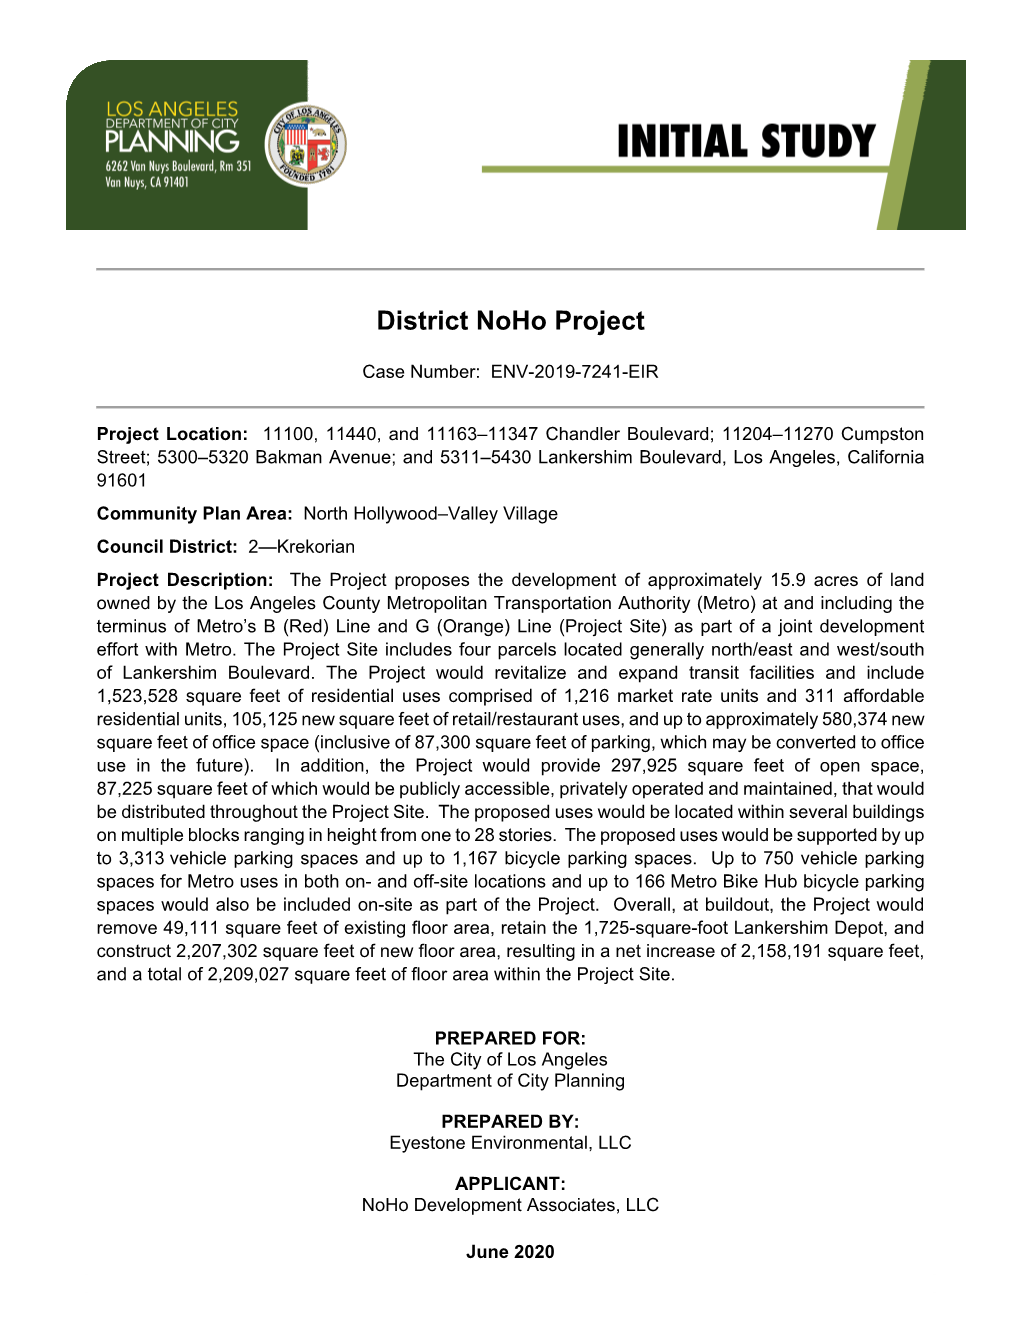 The District Noho Project Initial Study